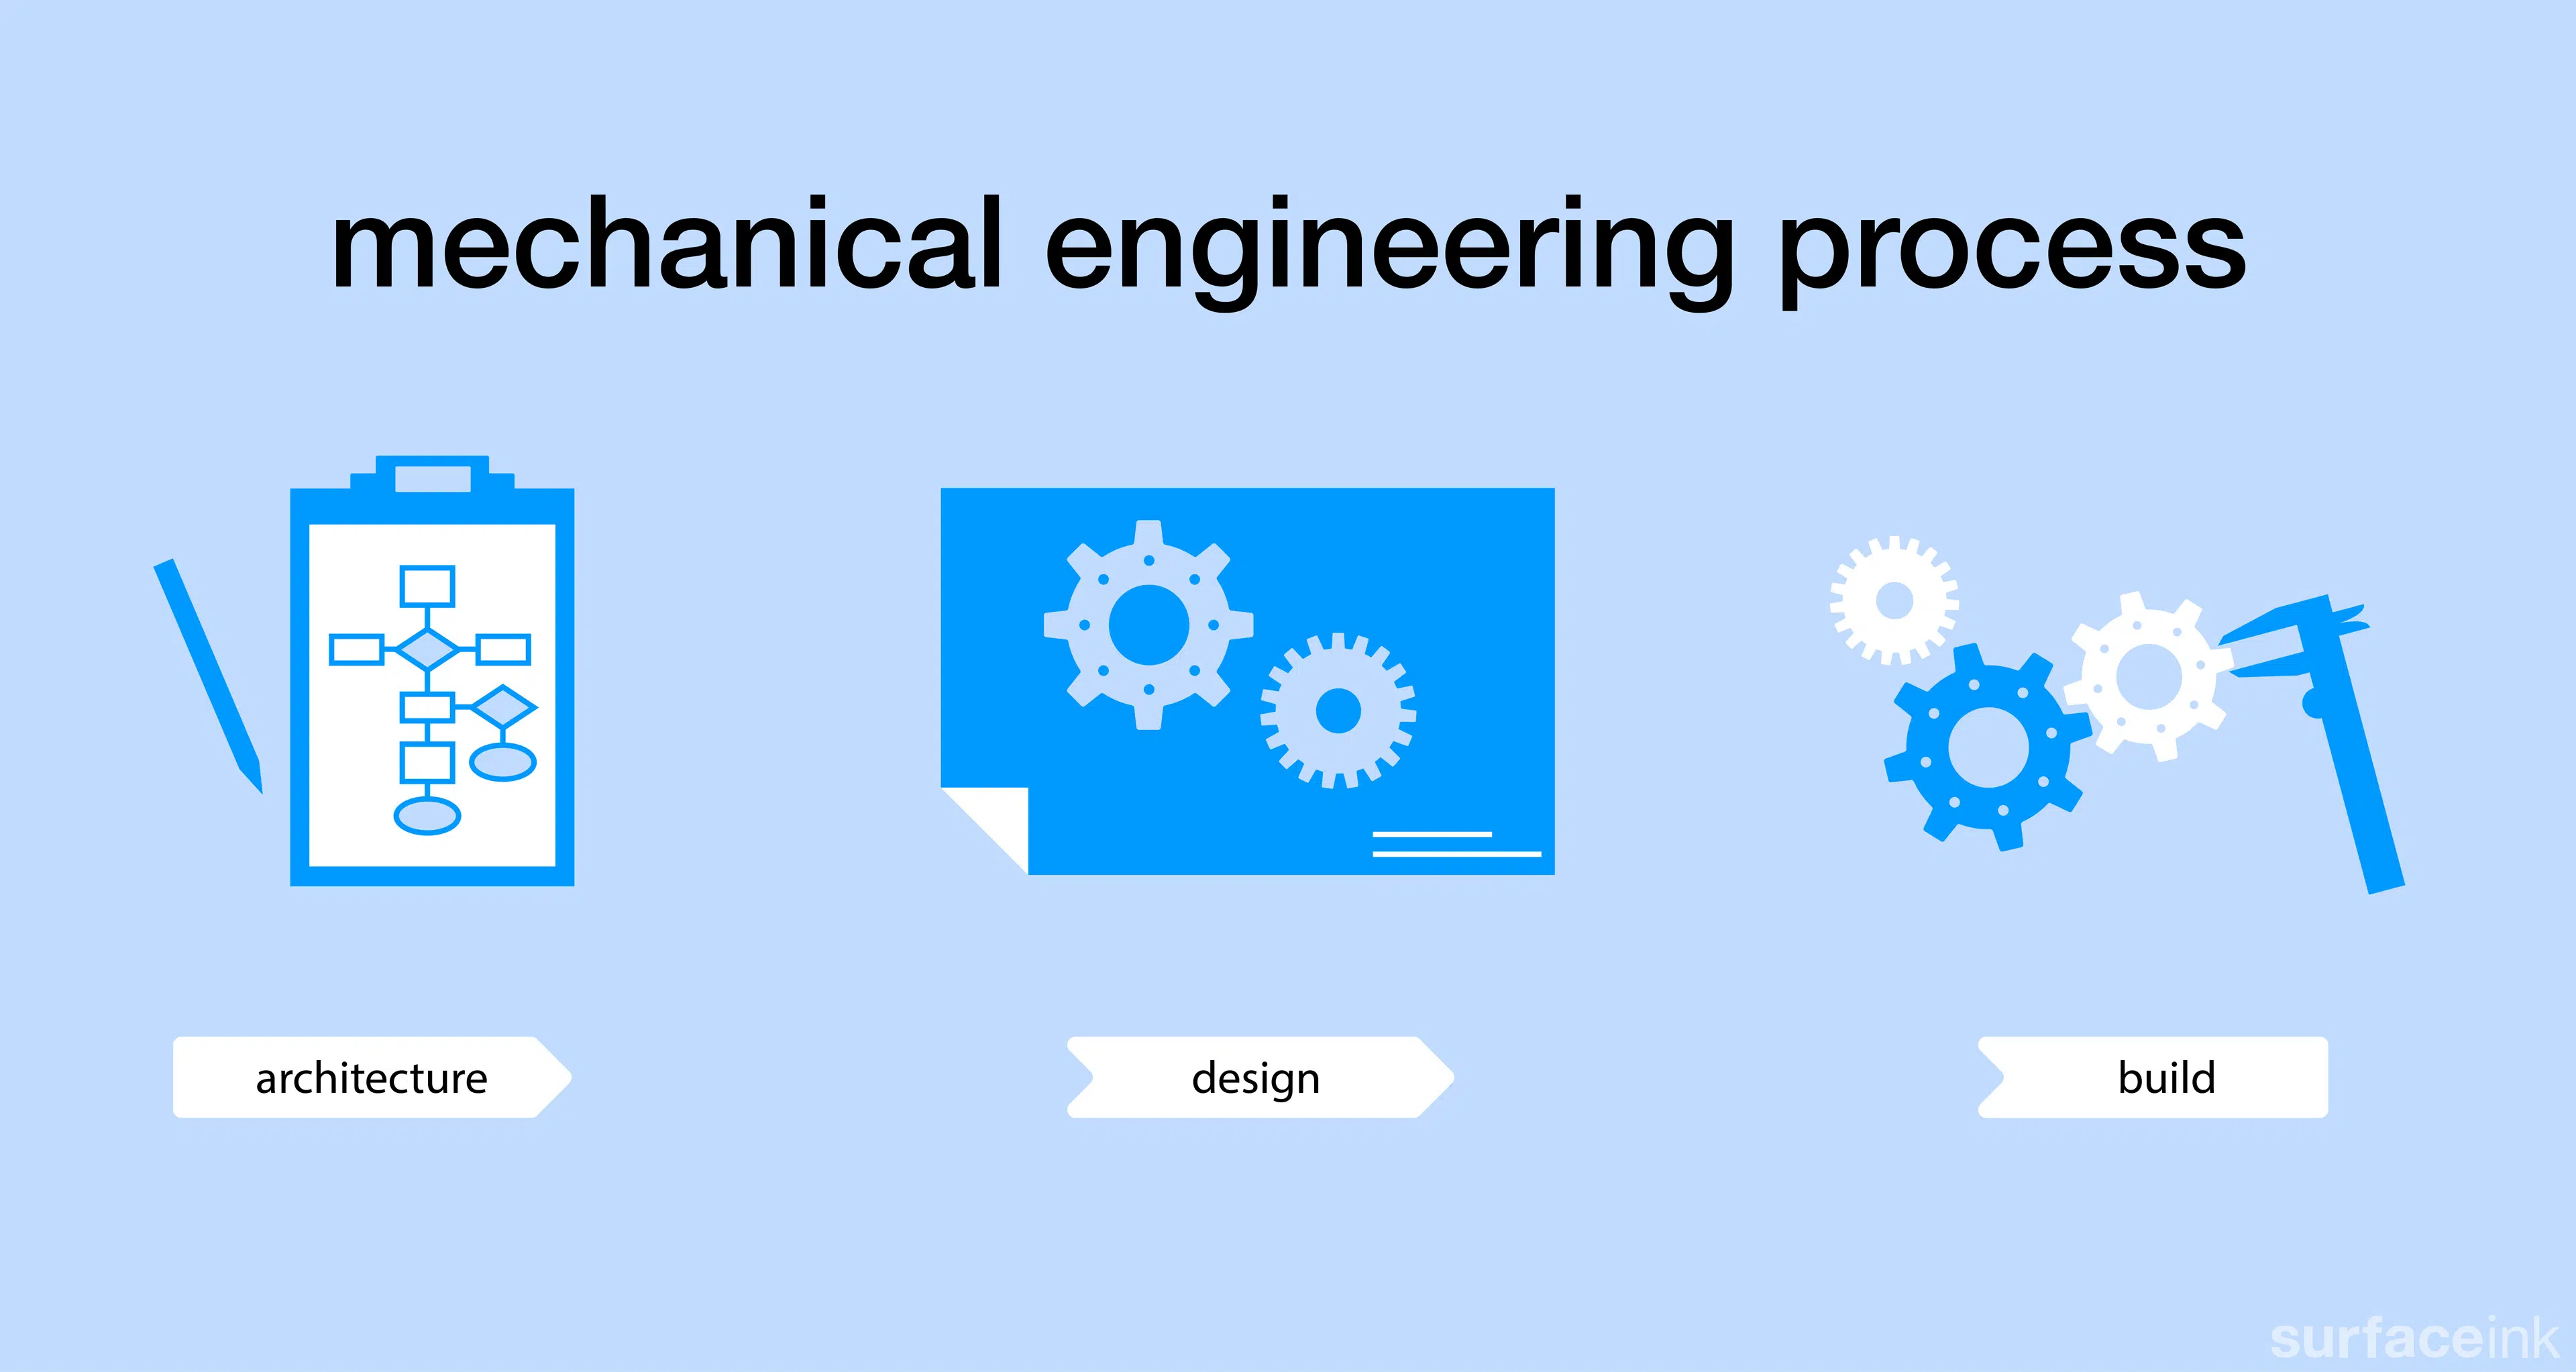 surfaceink-services-processes-illustration_5-mechanical-engineering